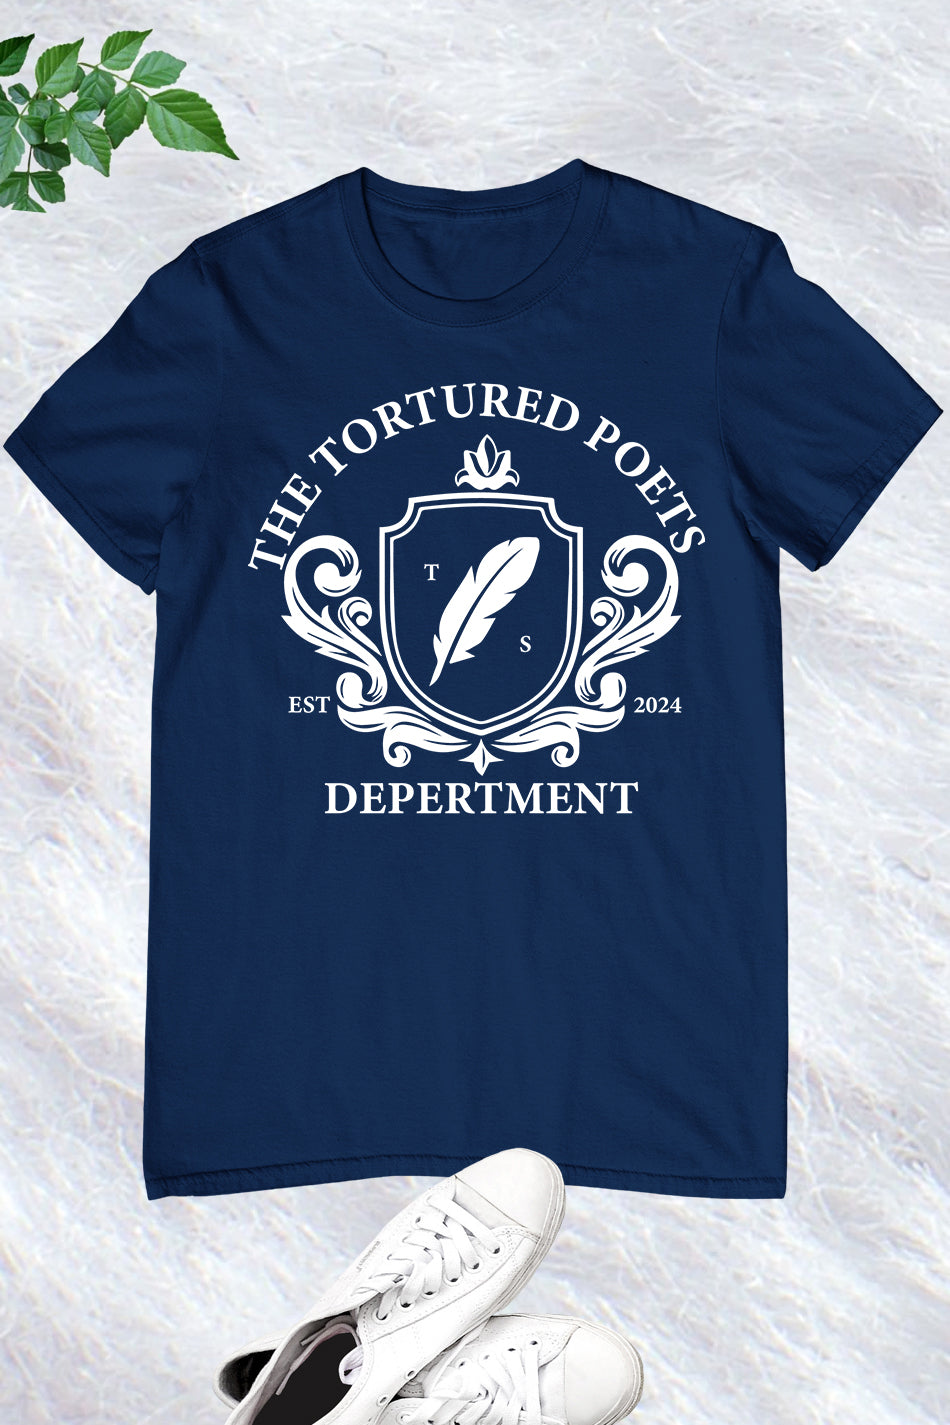 The Tortured Poets Department 2024 Shirts